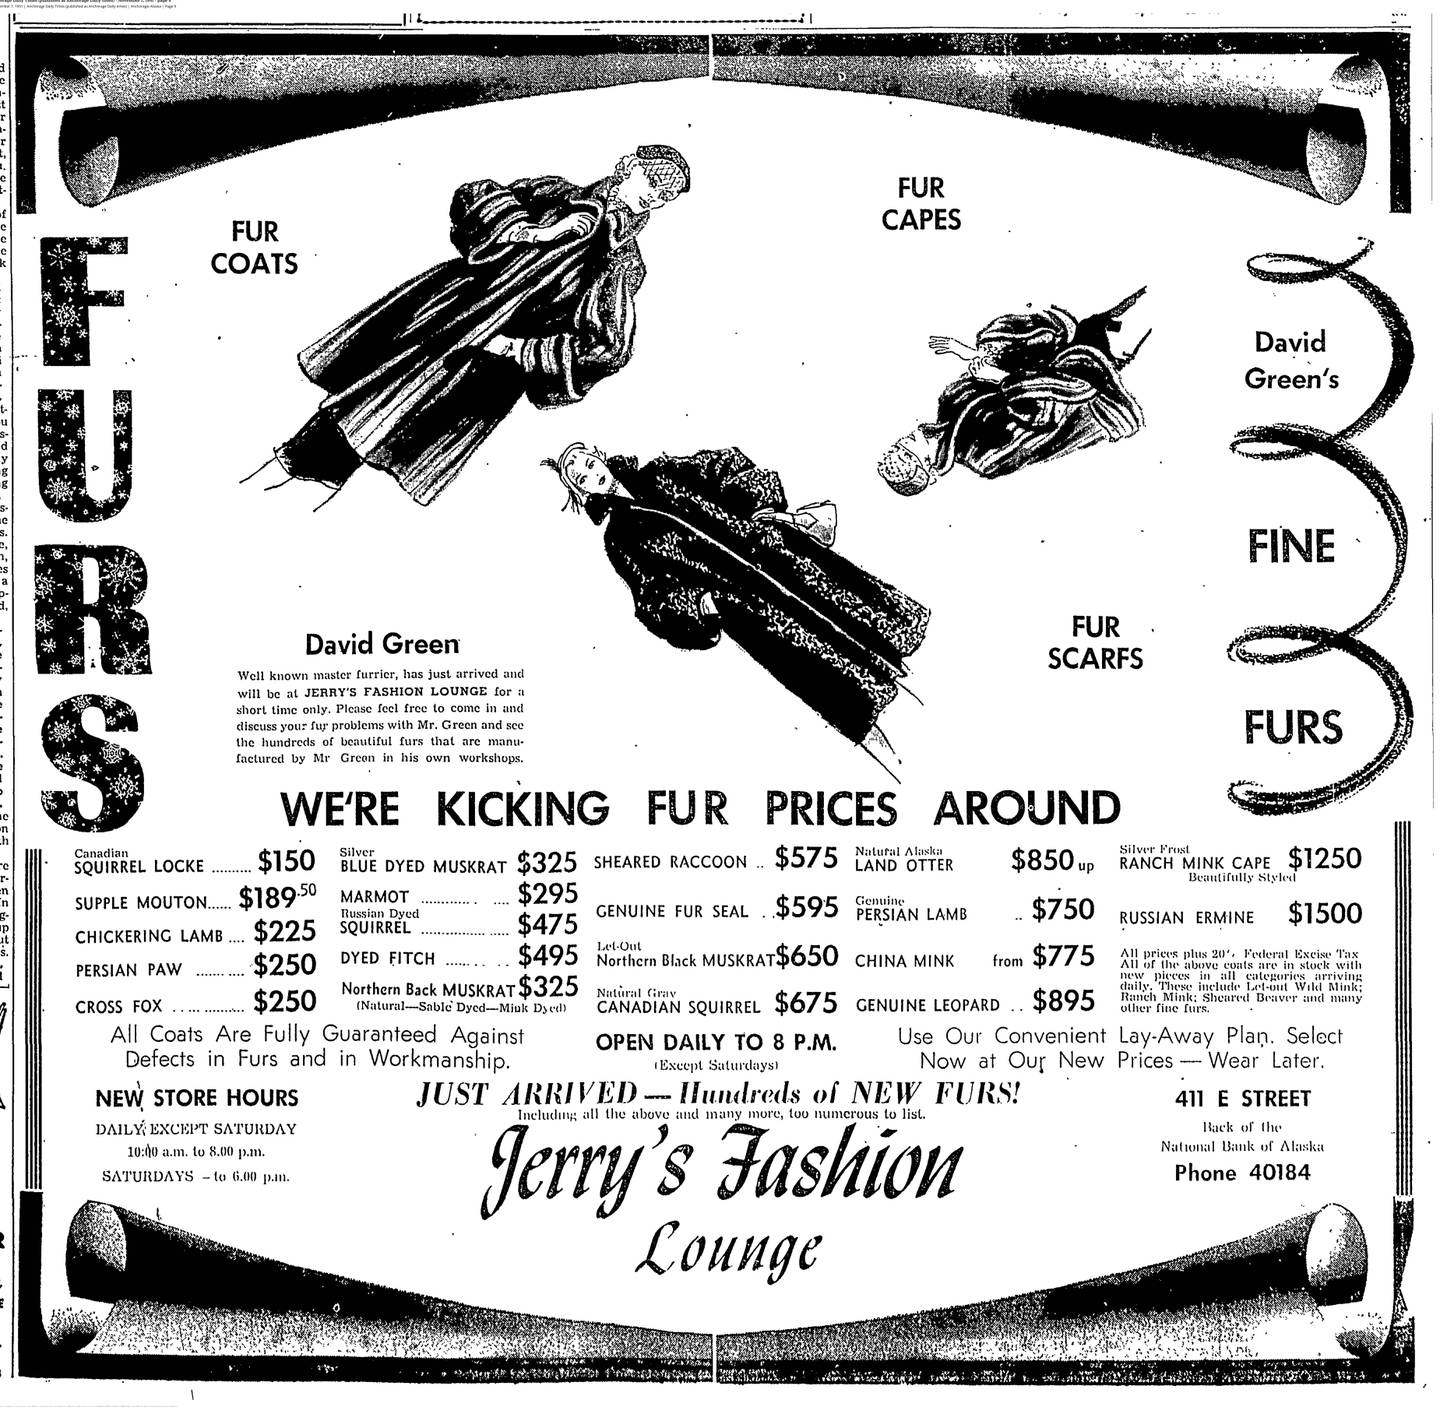 A Nov. 7, 1951 advertisement in the Anchorage Daily Times for fur coats including sheared raccoon